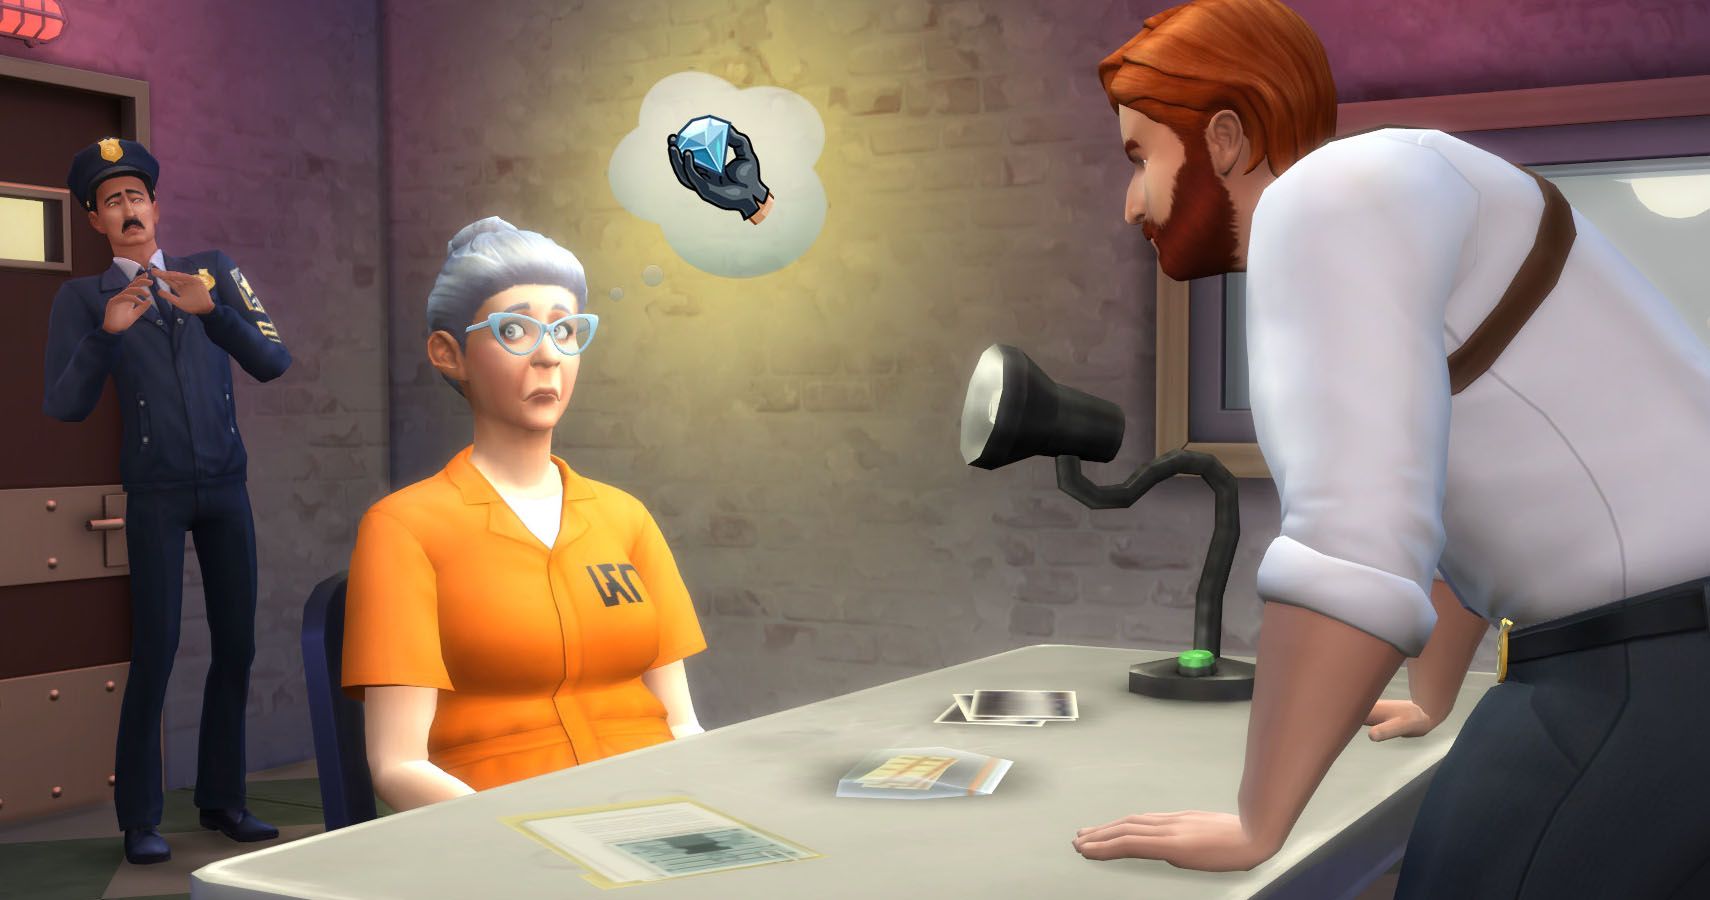 A detective shining a lamp into an older sims face.